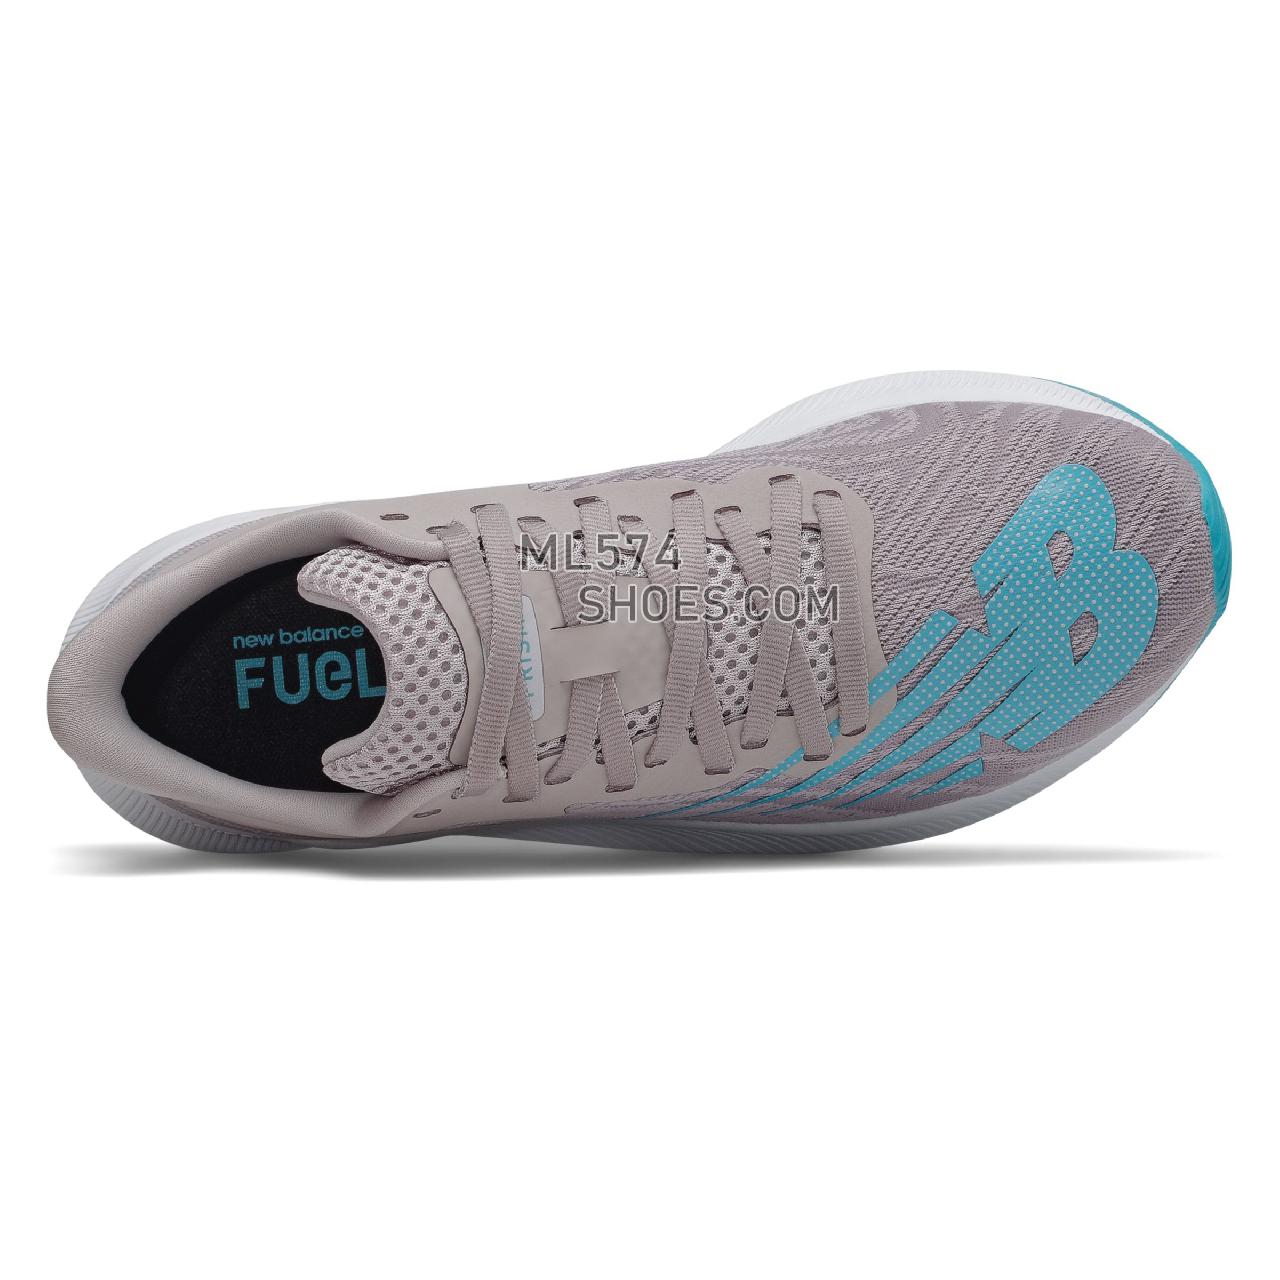 New Balance FuelCell Prism - Women's Stability Running - Logwood with Virtual Sky - WFCPZCR